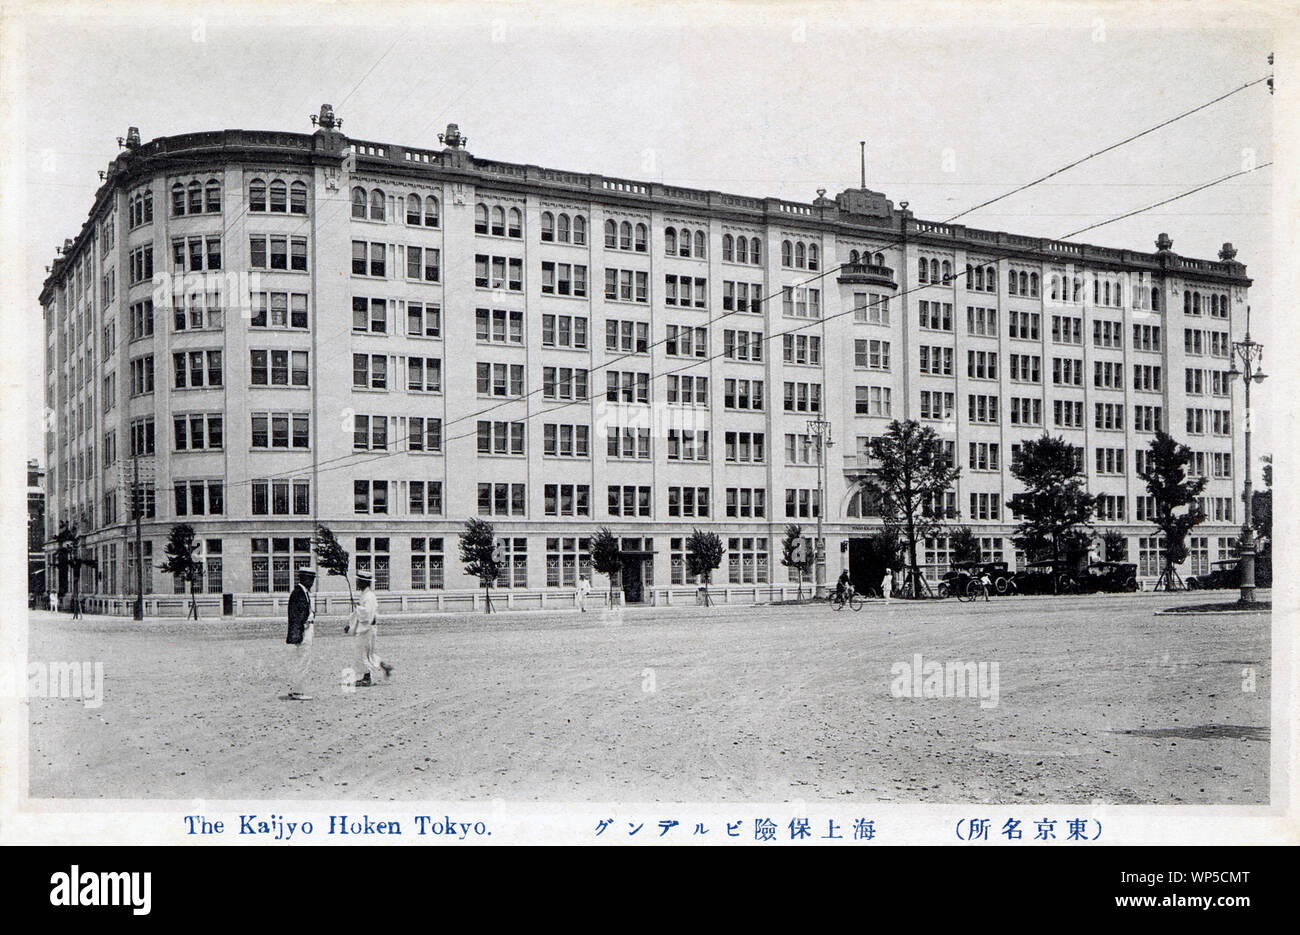 [ 1920s Japan - Tokio Marine Insurance Company in Tokyo ] —   The Kaijo Hoken Building in Marunouchi, Tokyo.  Completed in 1918, the building housed the offices of the Tokio Marine Insurance Company. Established in 1879 as Japan's first non-life insurance company, it specialized in marine cargo insurance.  In 1880 it appointed its first overseas agents, in London, Paris and New York. Today it is the largest non-mutual private insurance group in Japan.  Since 2004, the company is known as Tokio Marine & Nichido.  20th century vintage postcard. Stock Photo